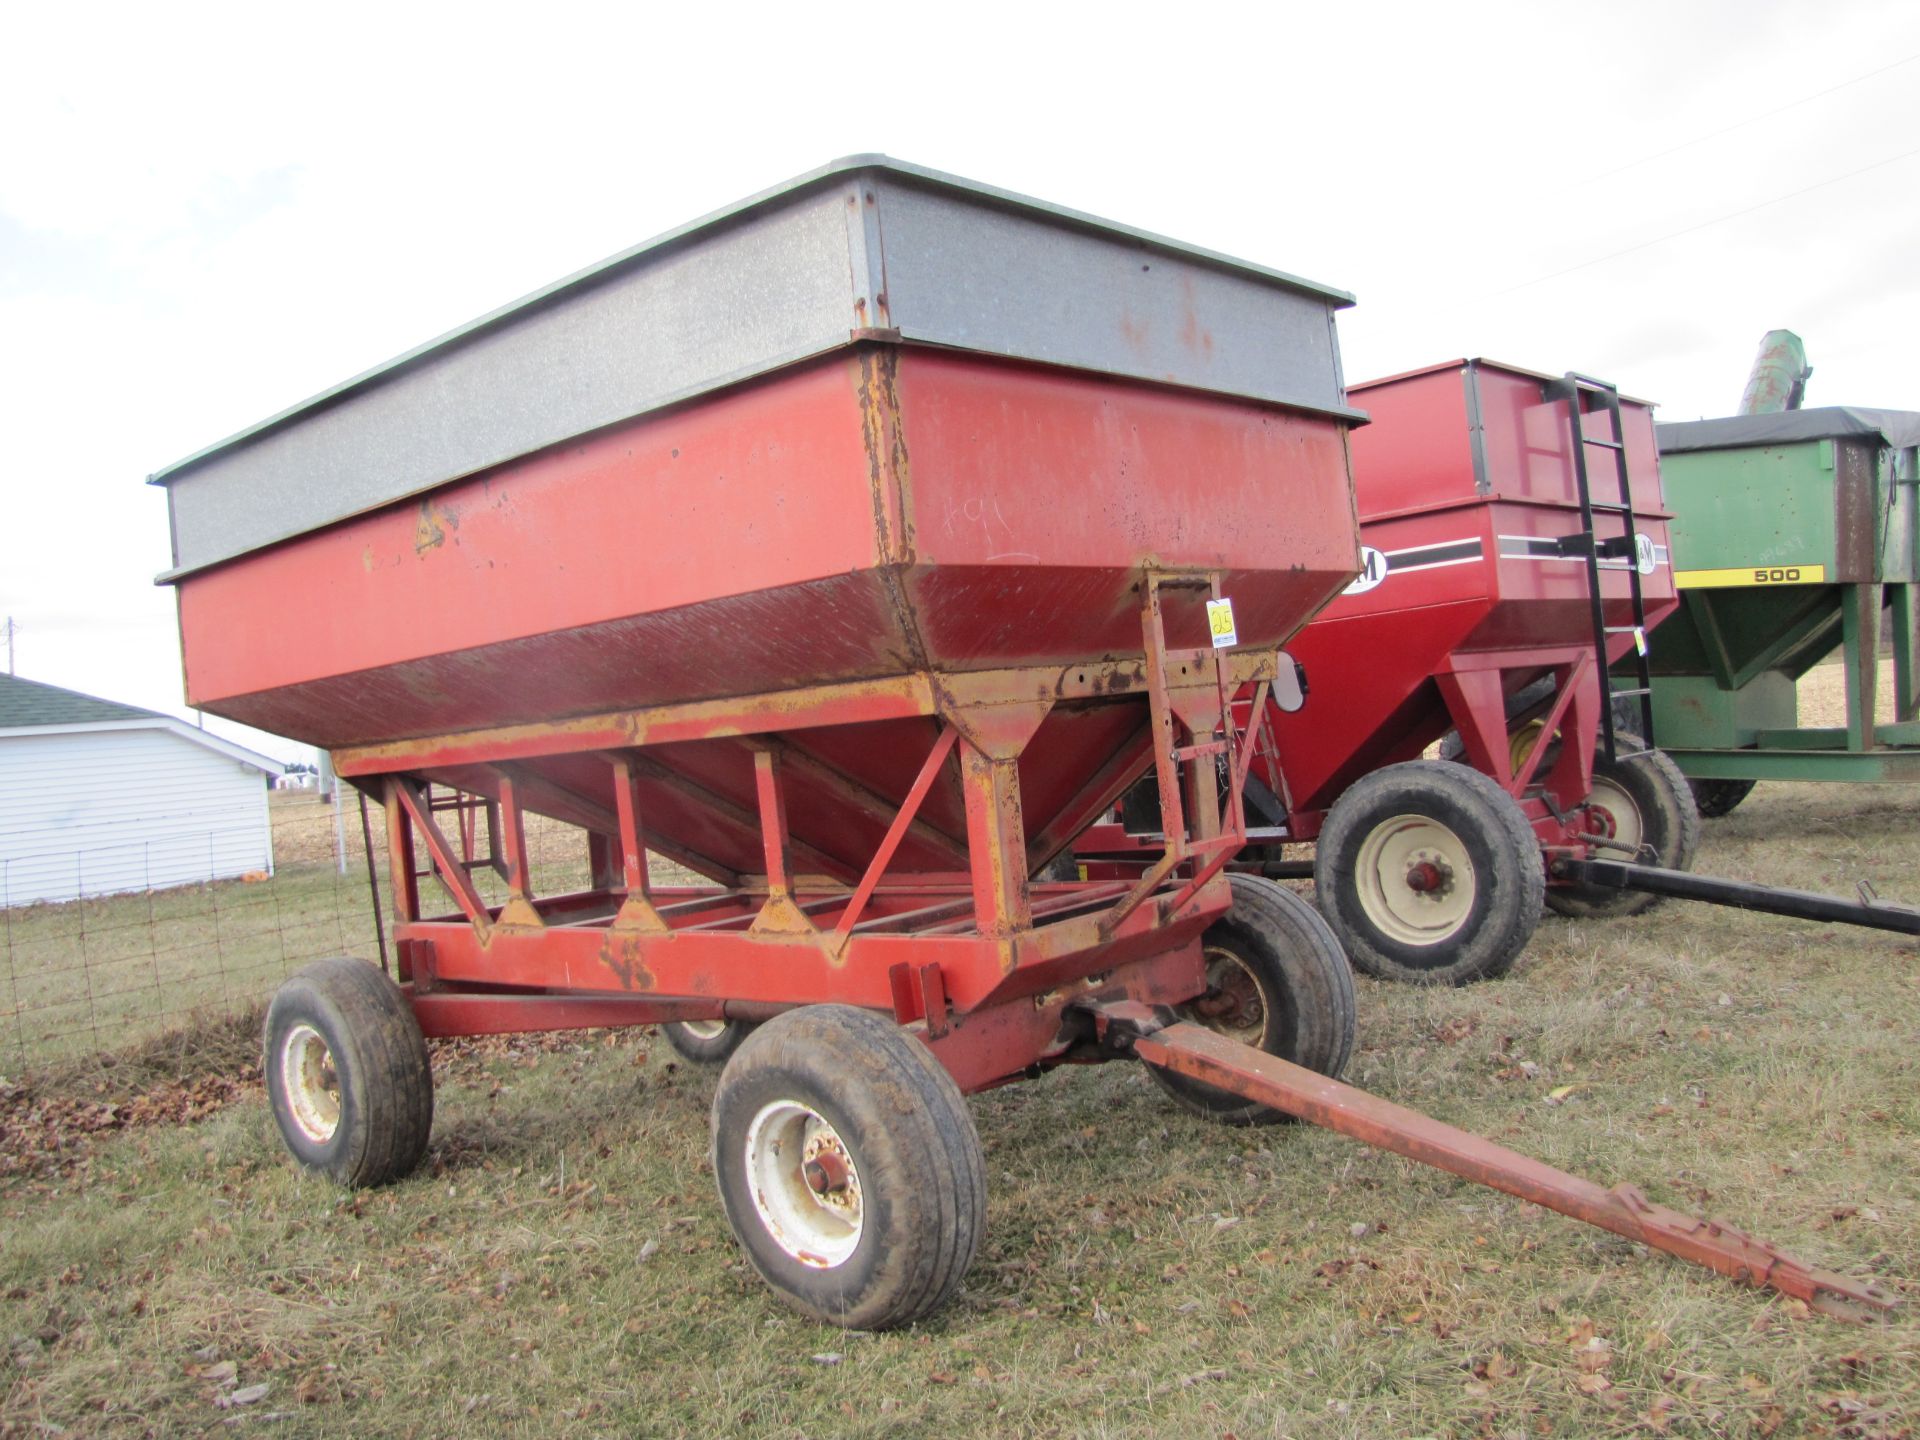 BII 335 deluxe gravity wagon, 12.5 SR15 tires, SN 13639 - Image 7 of 21